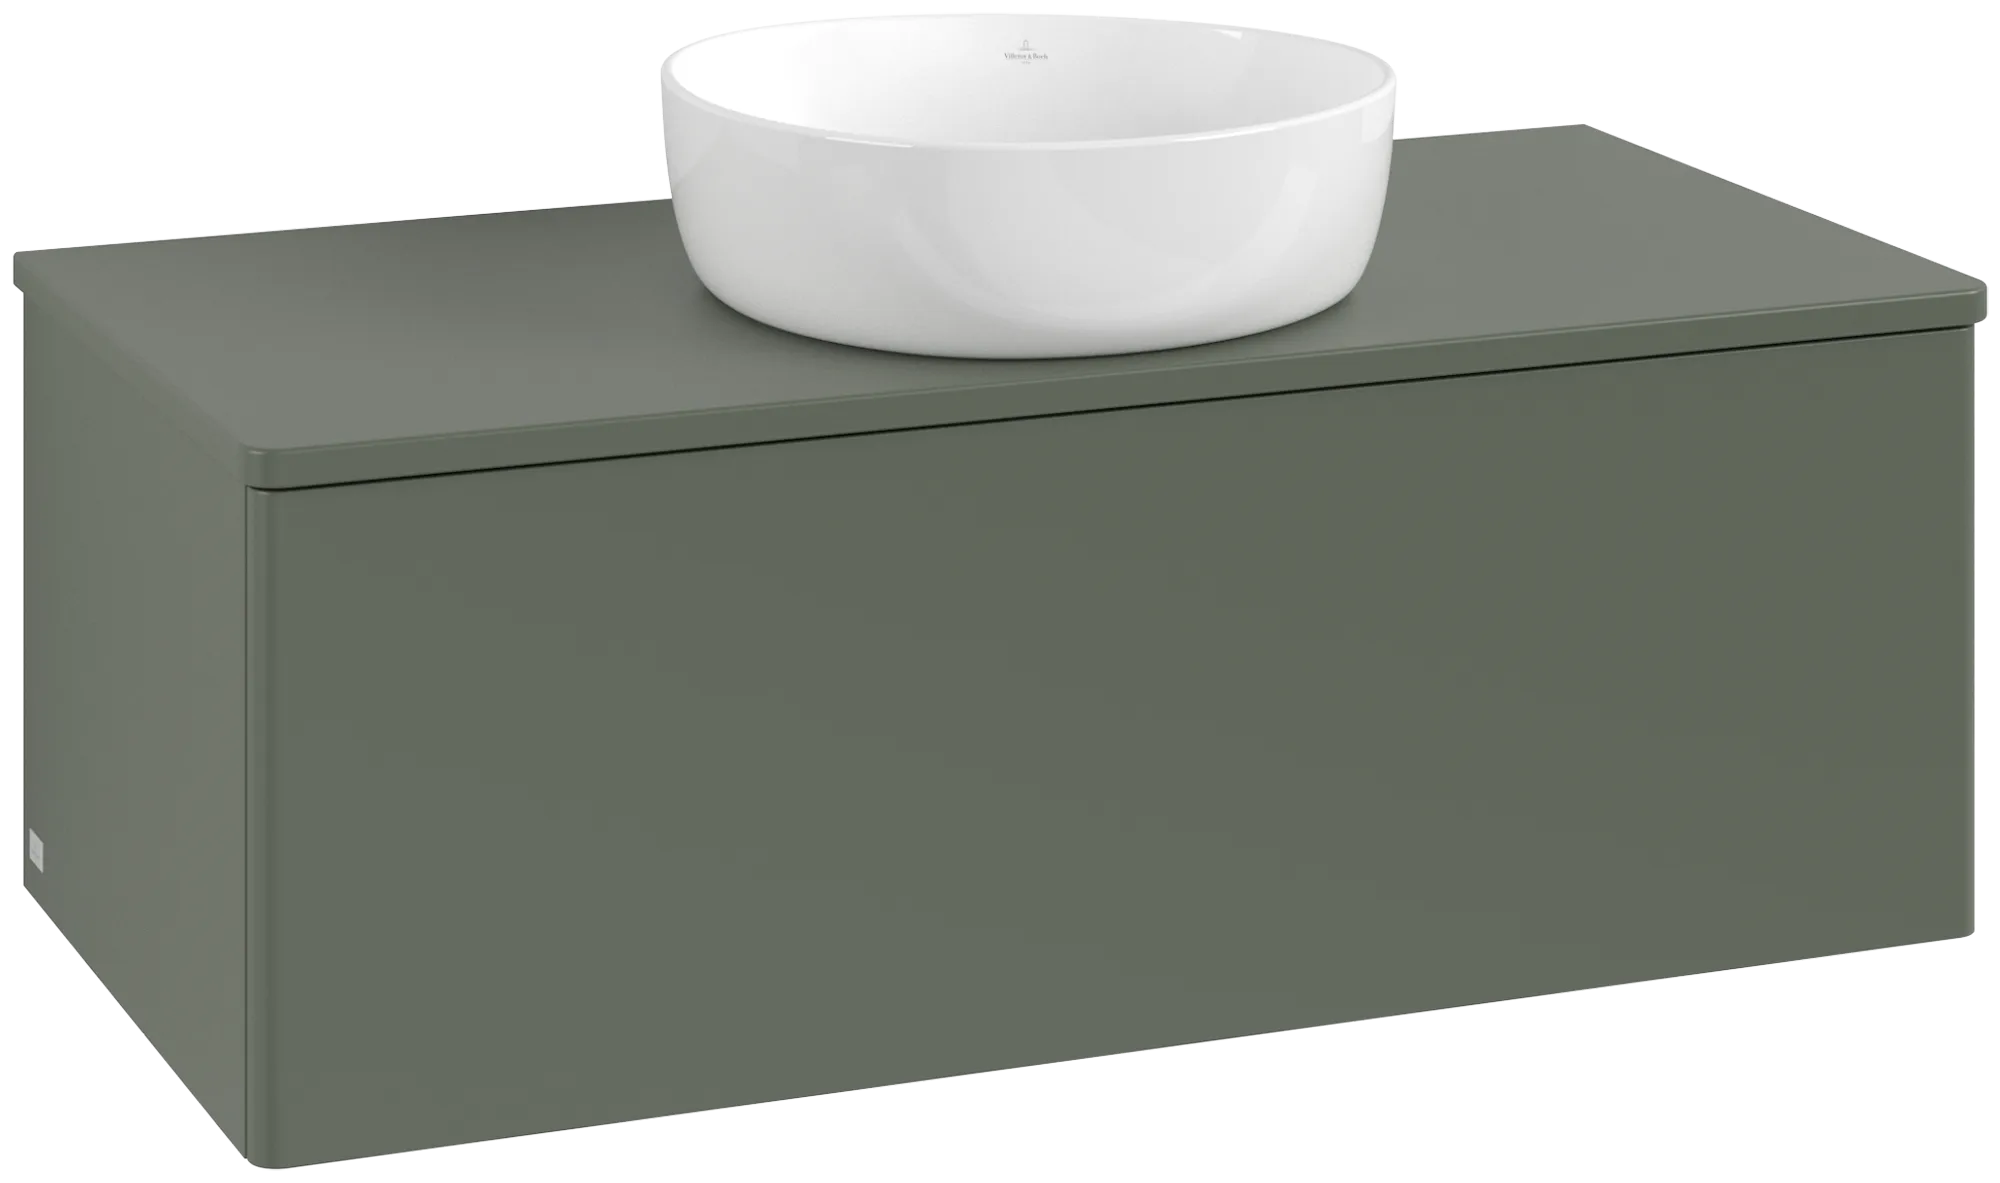 Picture of VILLEROY BOCH Antao Vanity unit, with lighting, 1 pull-out compartment, 1000 x 360 x 500 mm, Front without structure, Leaf Green Matt Lacquer / Leaf Green Matt Lacquer #L31050HL